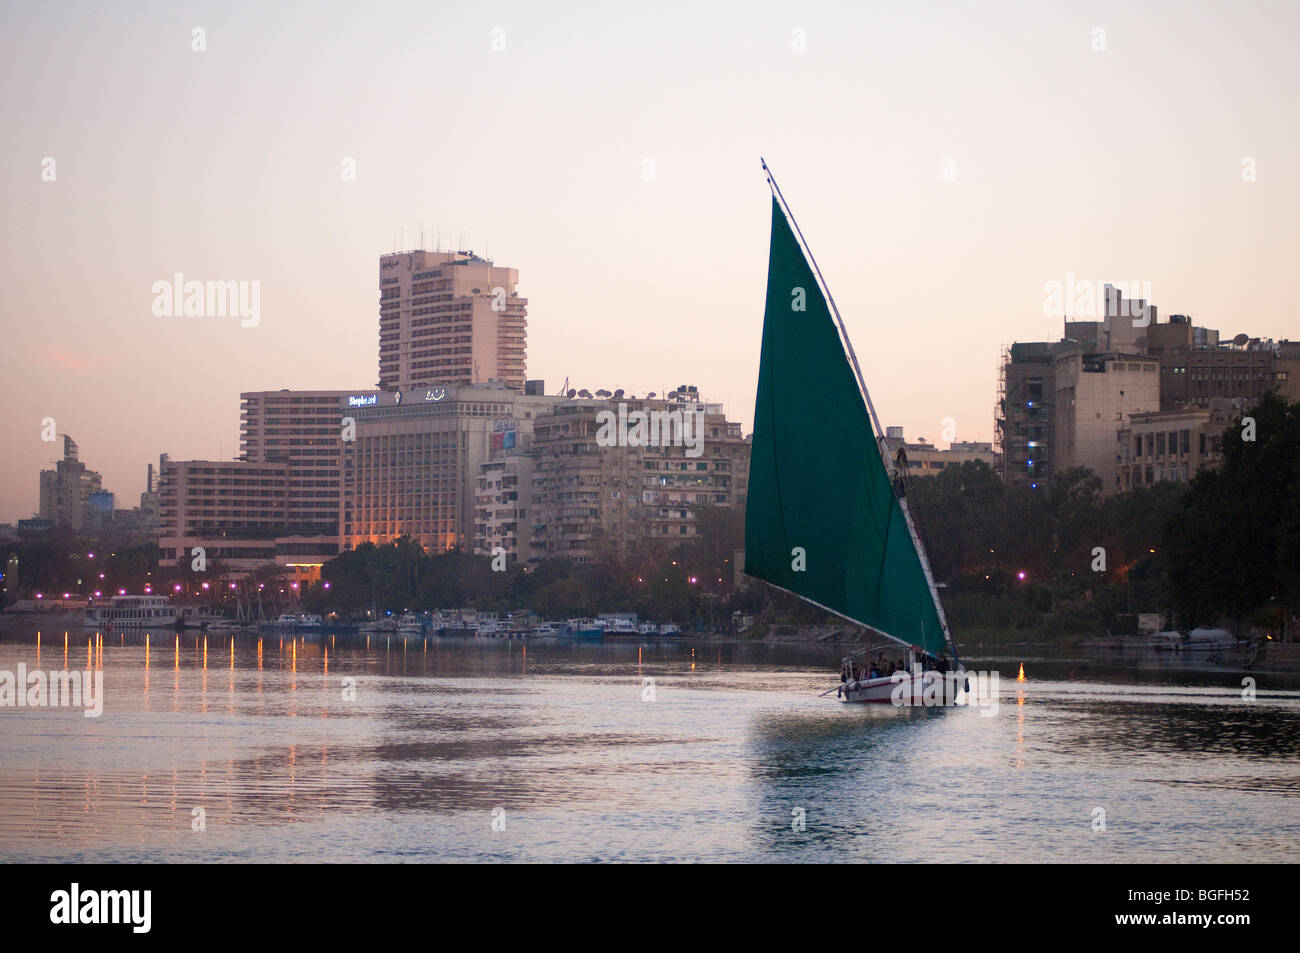 Early morning felucca boat ride on the Nile River in Cairo, Egypt, Africa. Stock Photo